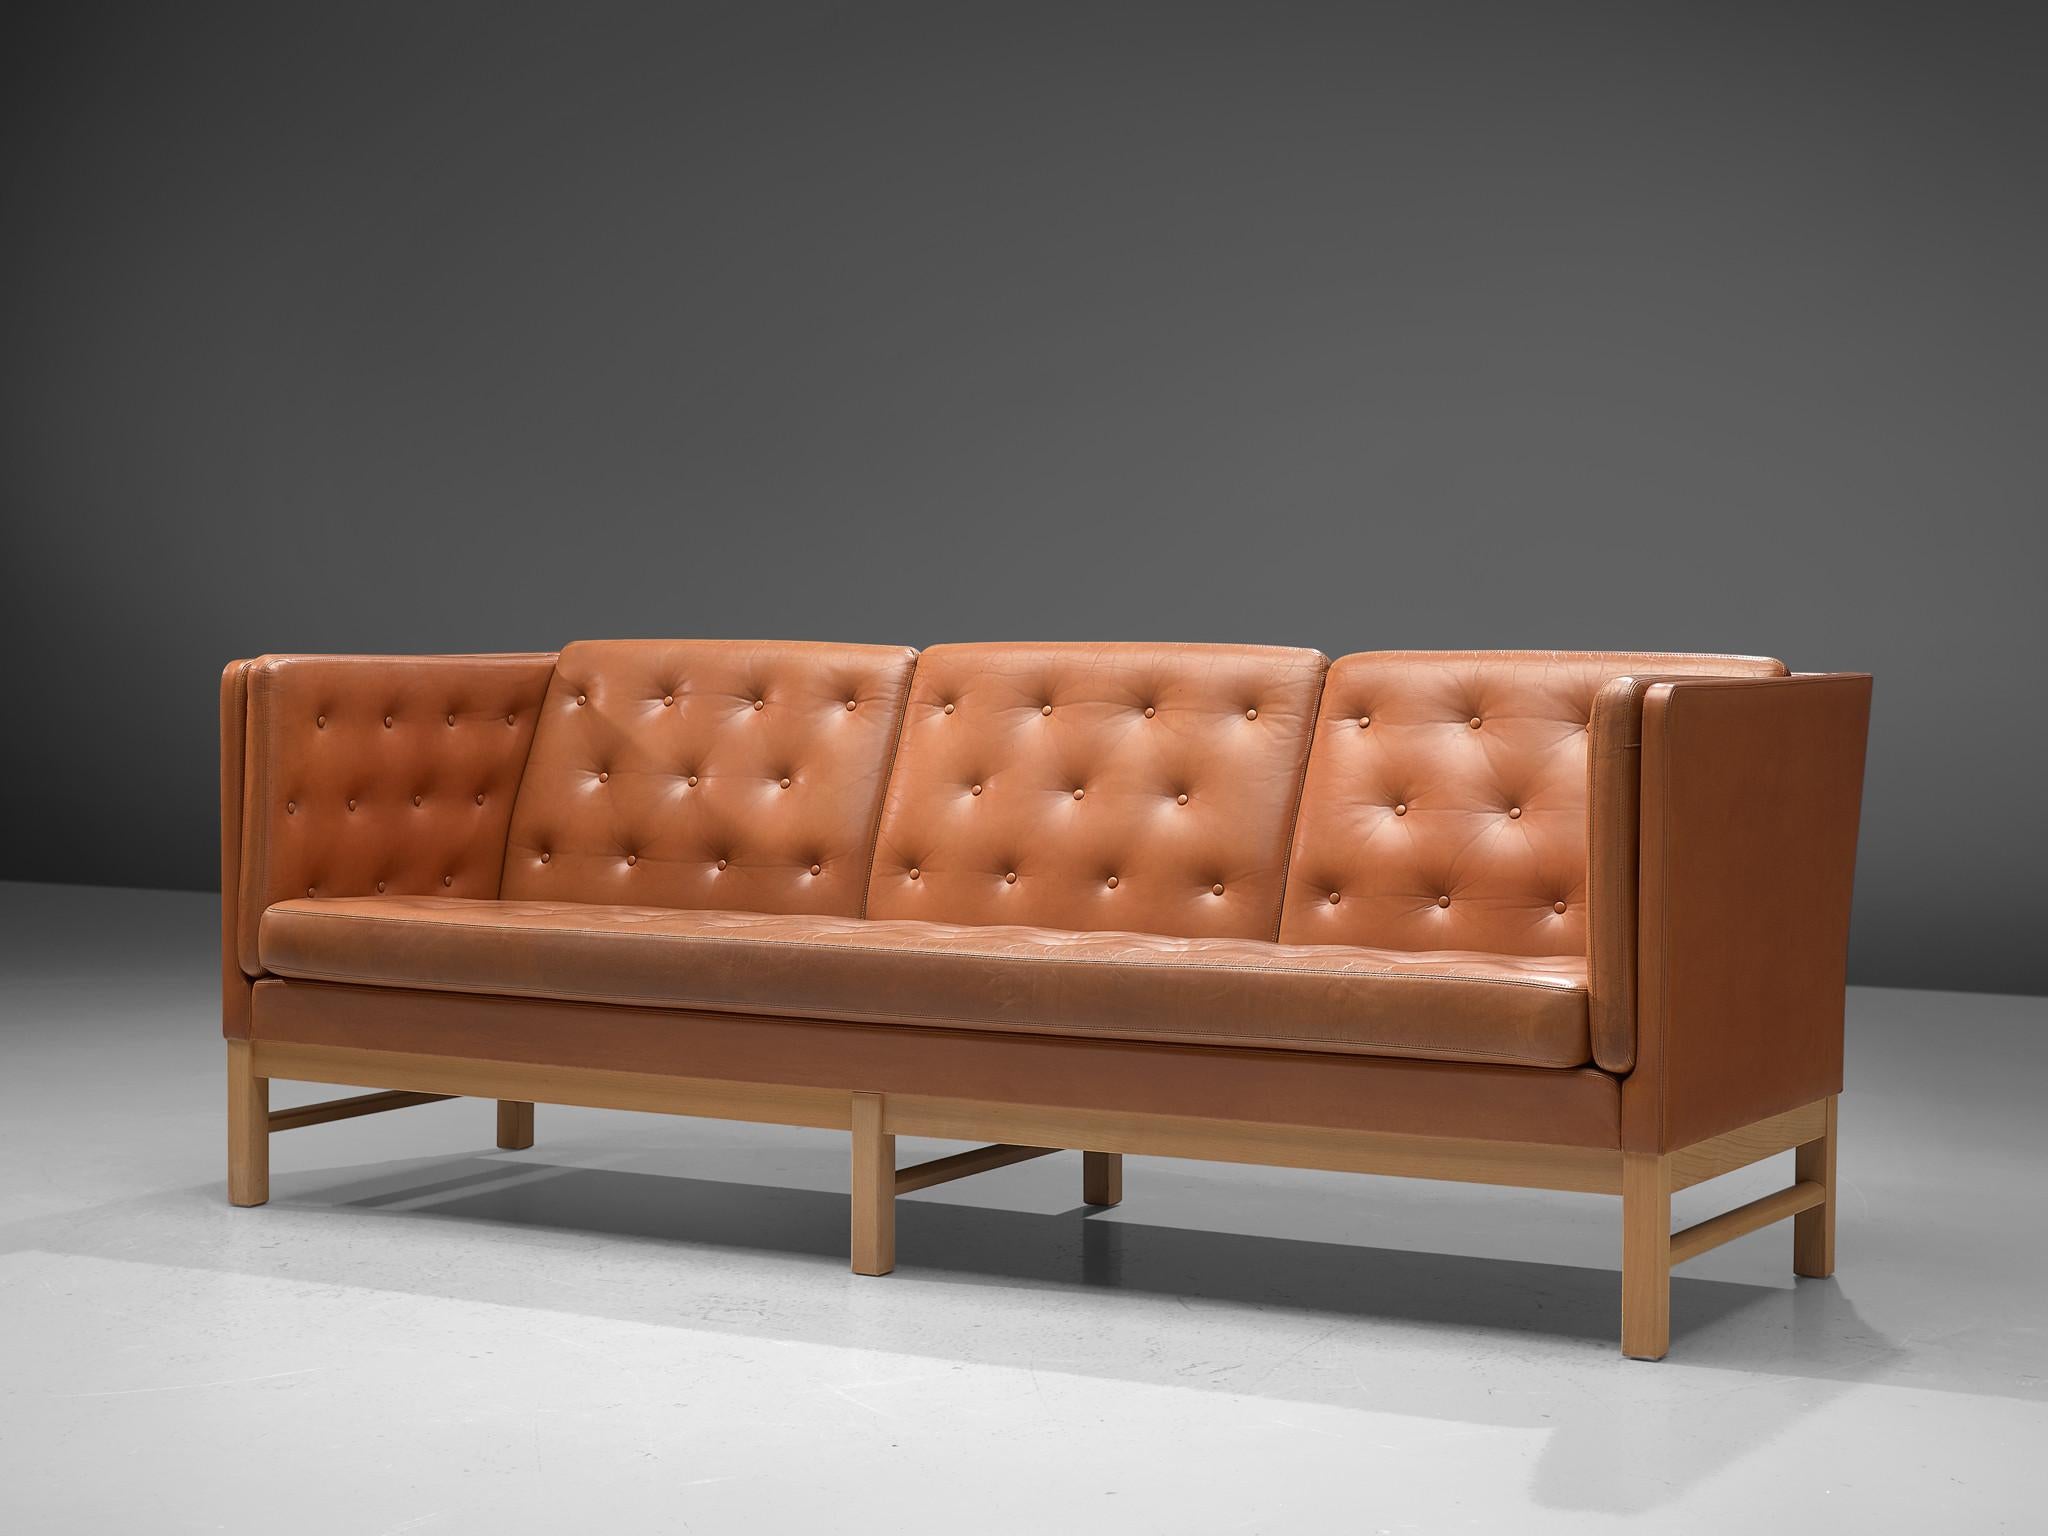 Erik Ole Jørgensen for Erik Jorgensen Møbelfabrik, sofa, model EJ 315-3, wood and leather, Denmark, 1972 

Elegant three-seat sofa by Erik Ole Jørgensen. This sofa has a luxurious appearance due to the tufted cognac leather and the high backrest and